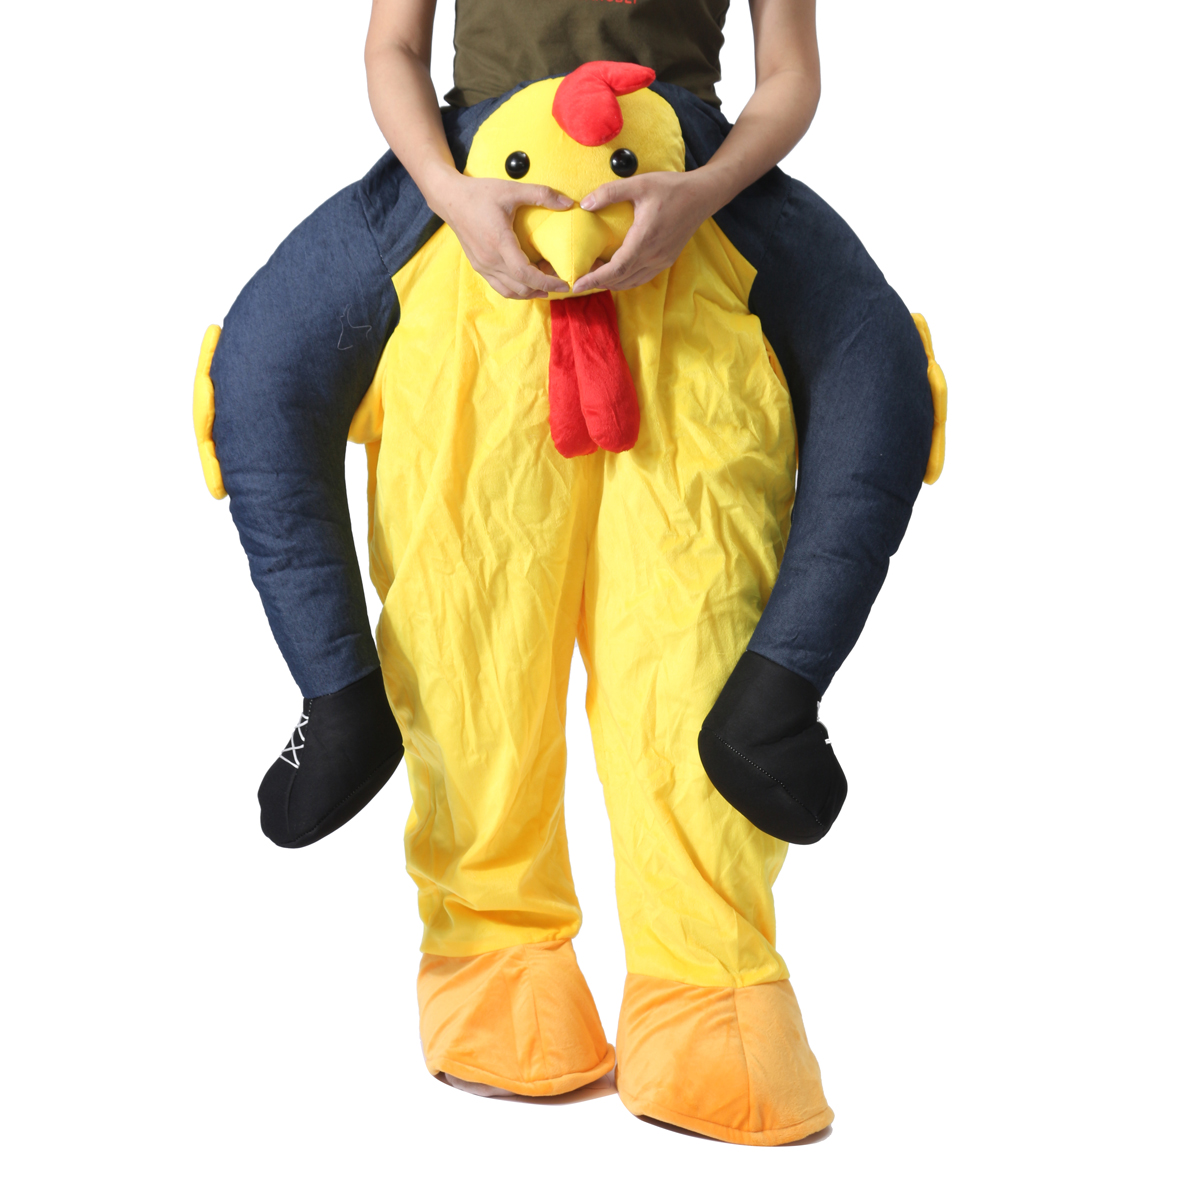 Hallowen-Christmas-Shoulder-Carry-Me-Piggy-Back-Ride-On-Fancy-Dress-Adult-Party-Costume-Outfit-1204091-3